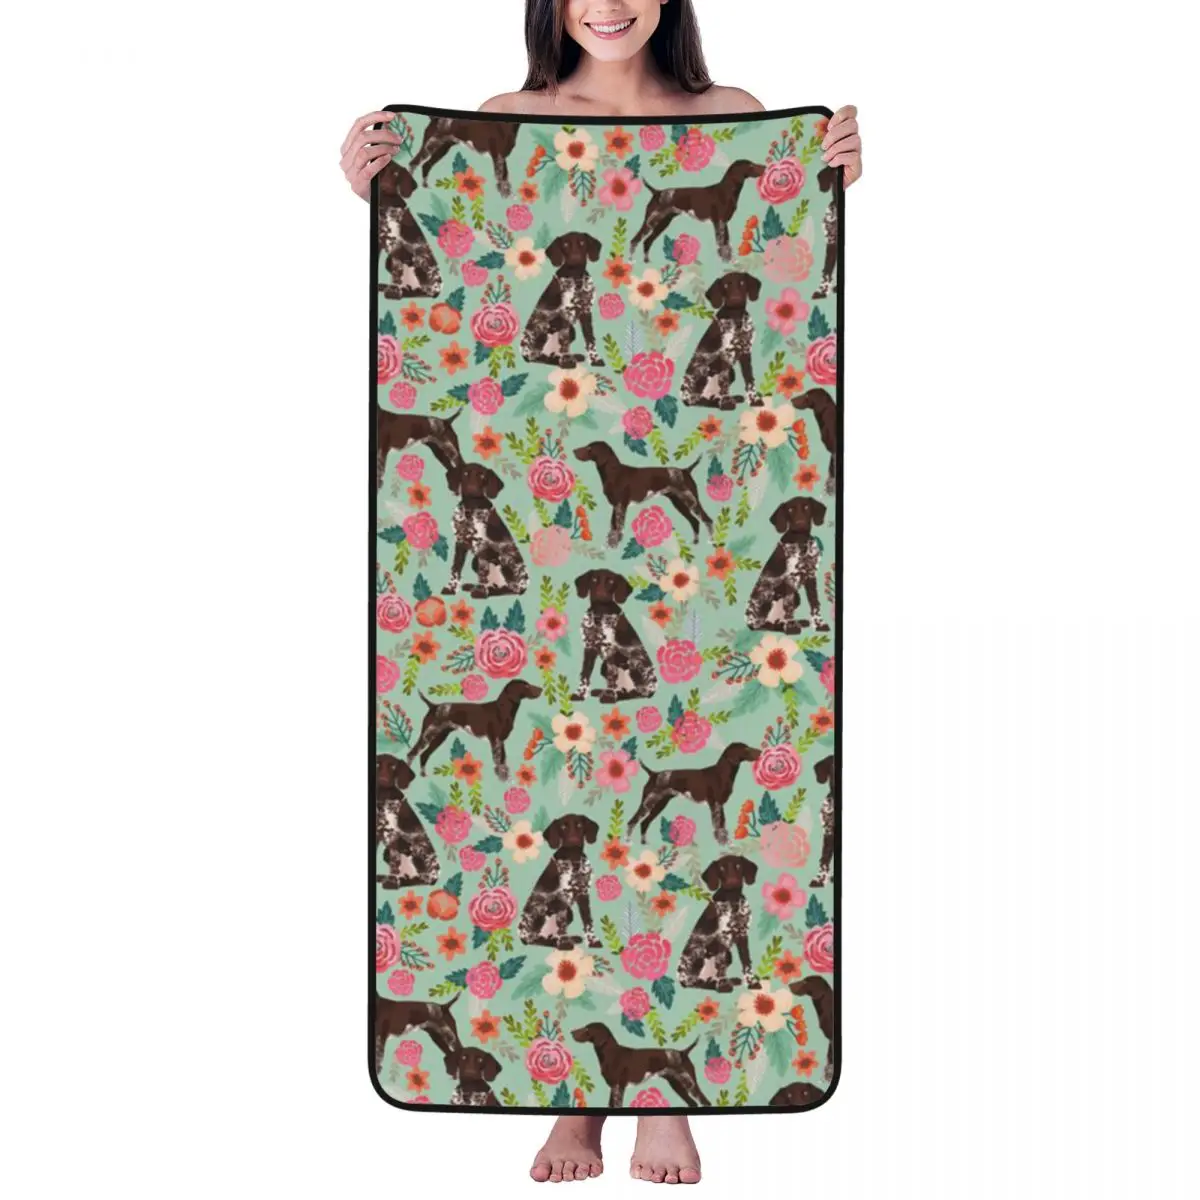 

German Shorthaired Pointer And Floral Beautiful Beach Towel Microfiber Bath Towel Blanket for Camping Swim Pool Travel Beach Gym